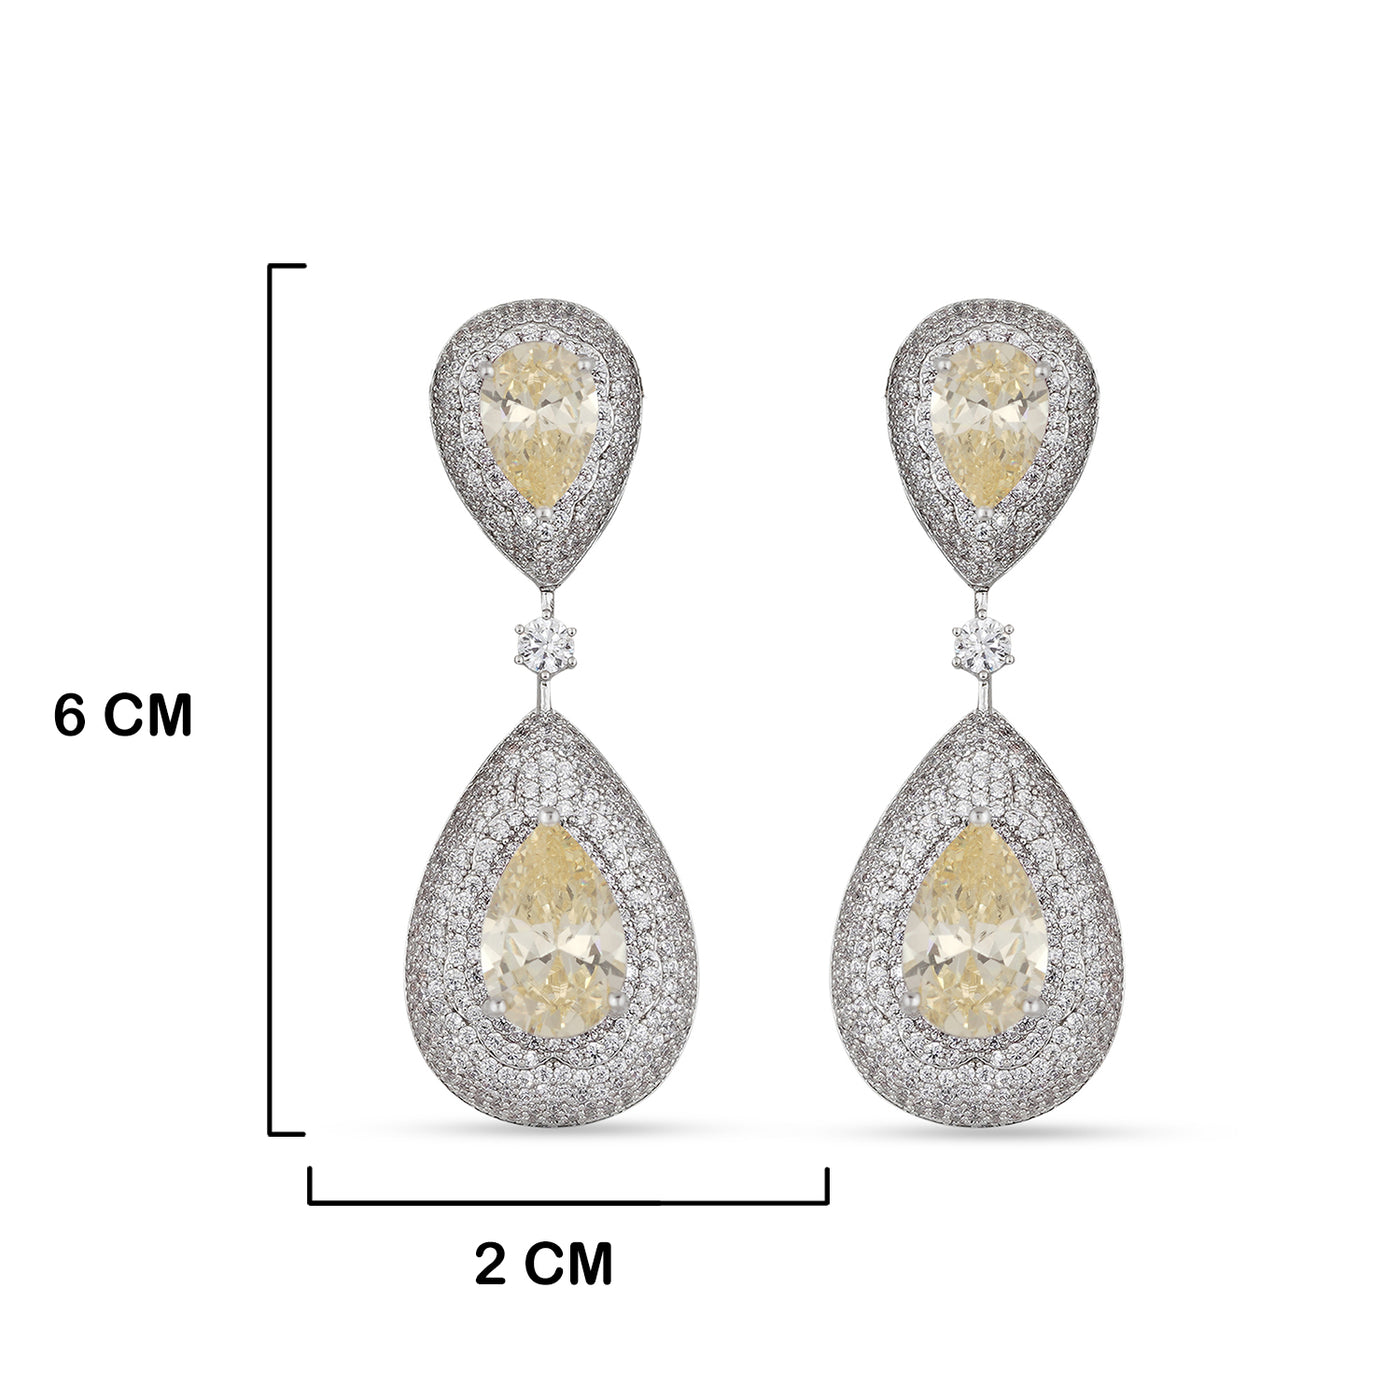 Yellow Stoned CZ Earrings with measurements in cm. 6cm by 2cm.